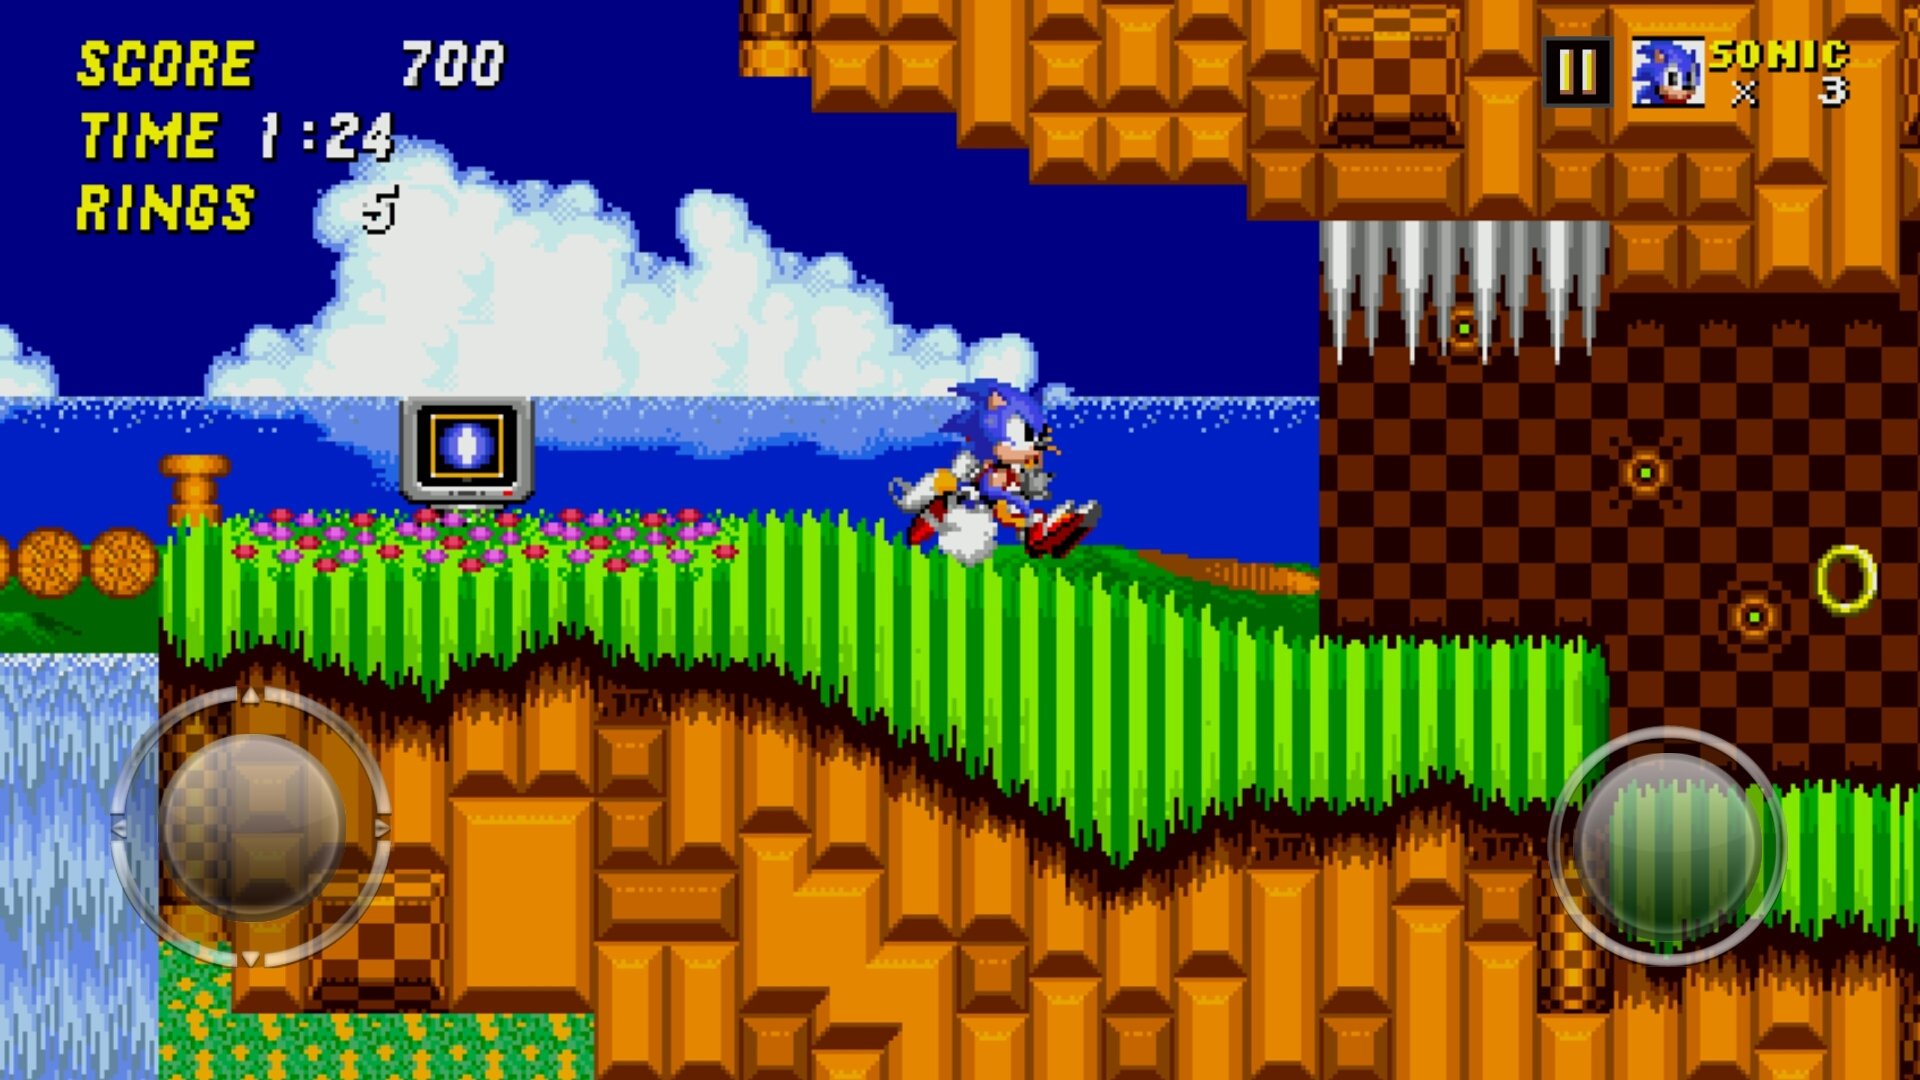 Sonic 2 hd free download